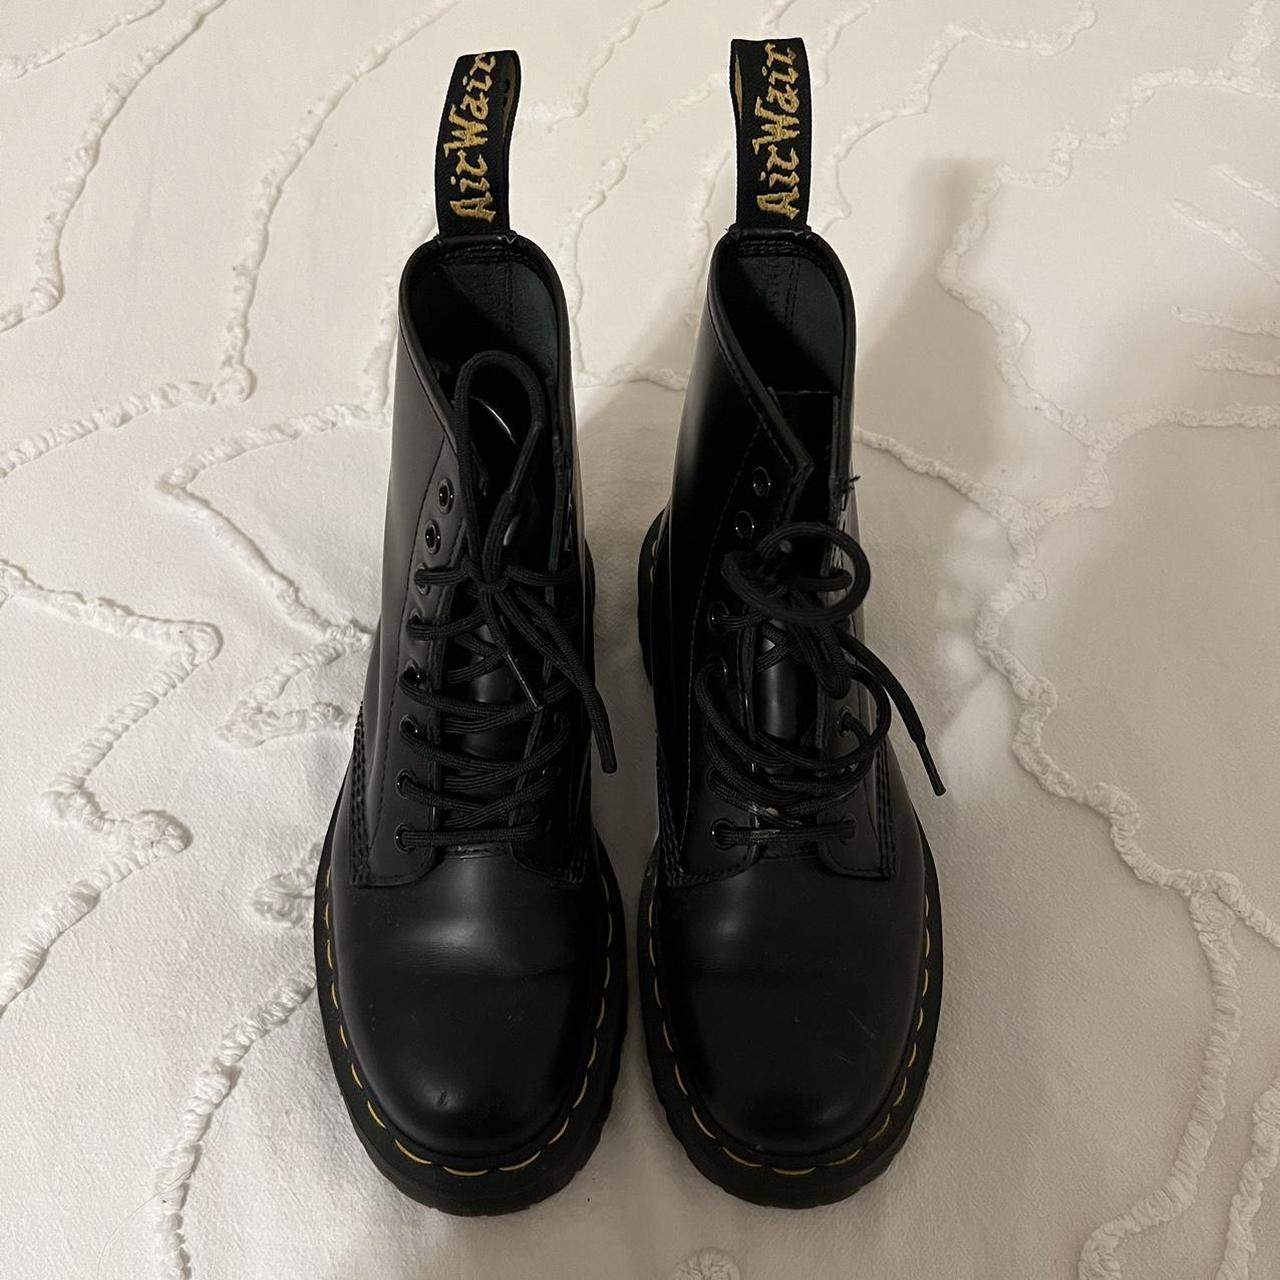 Dr. Martens Women's Black and Yellow Boots (2)